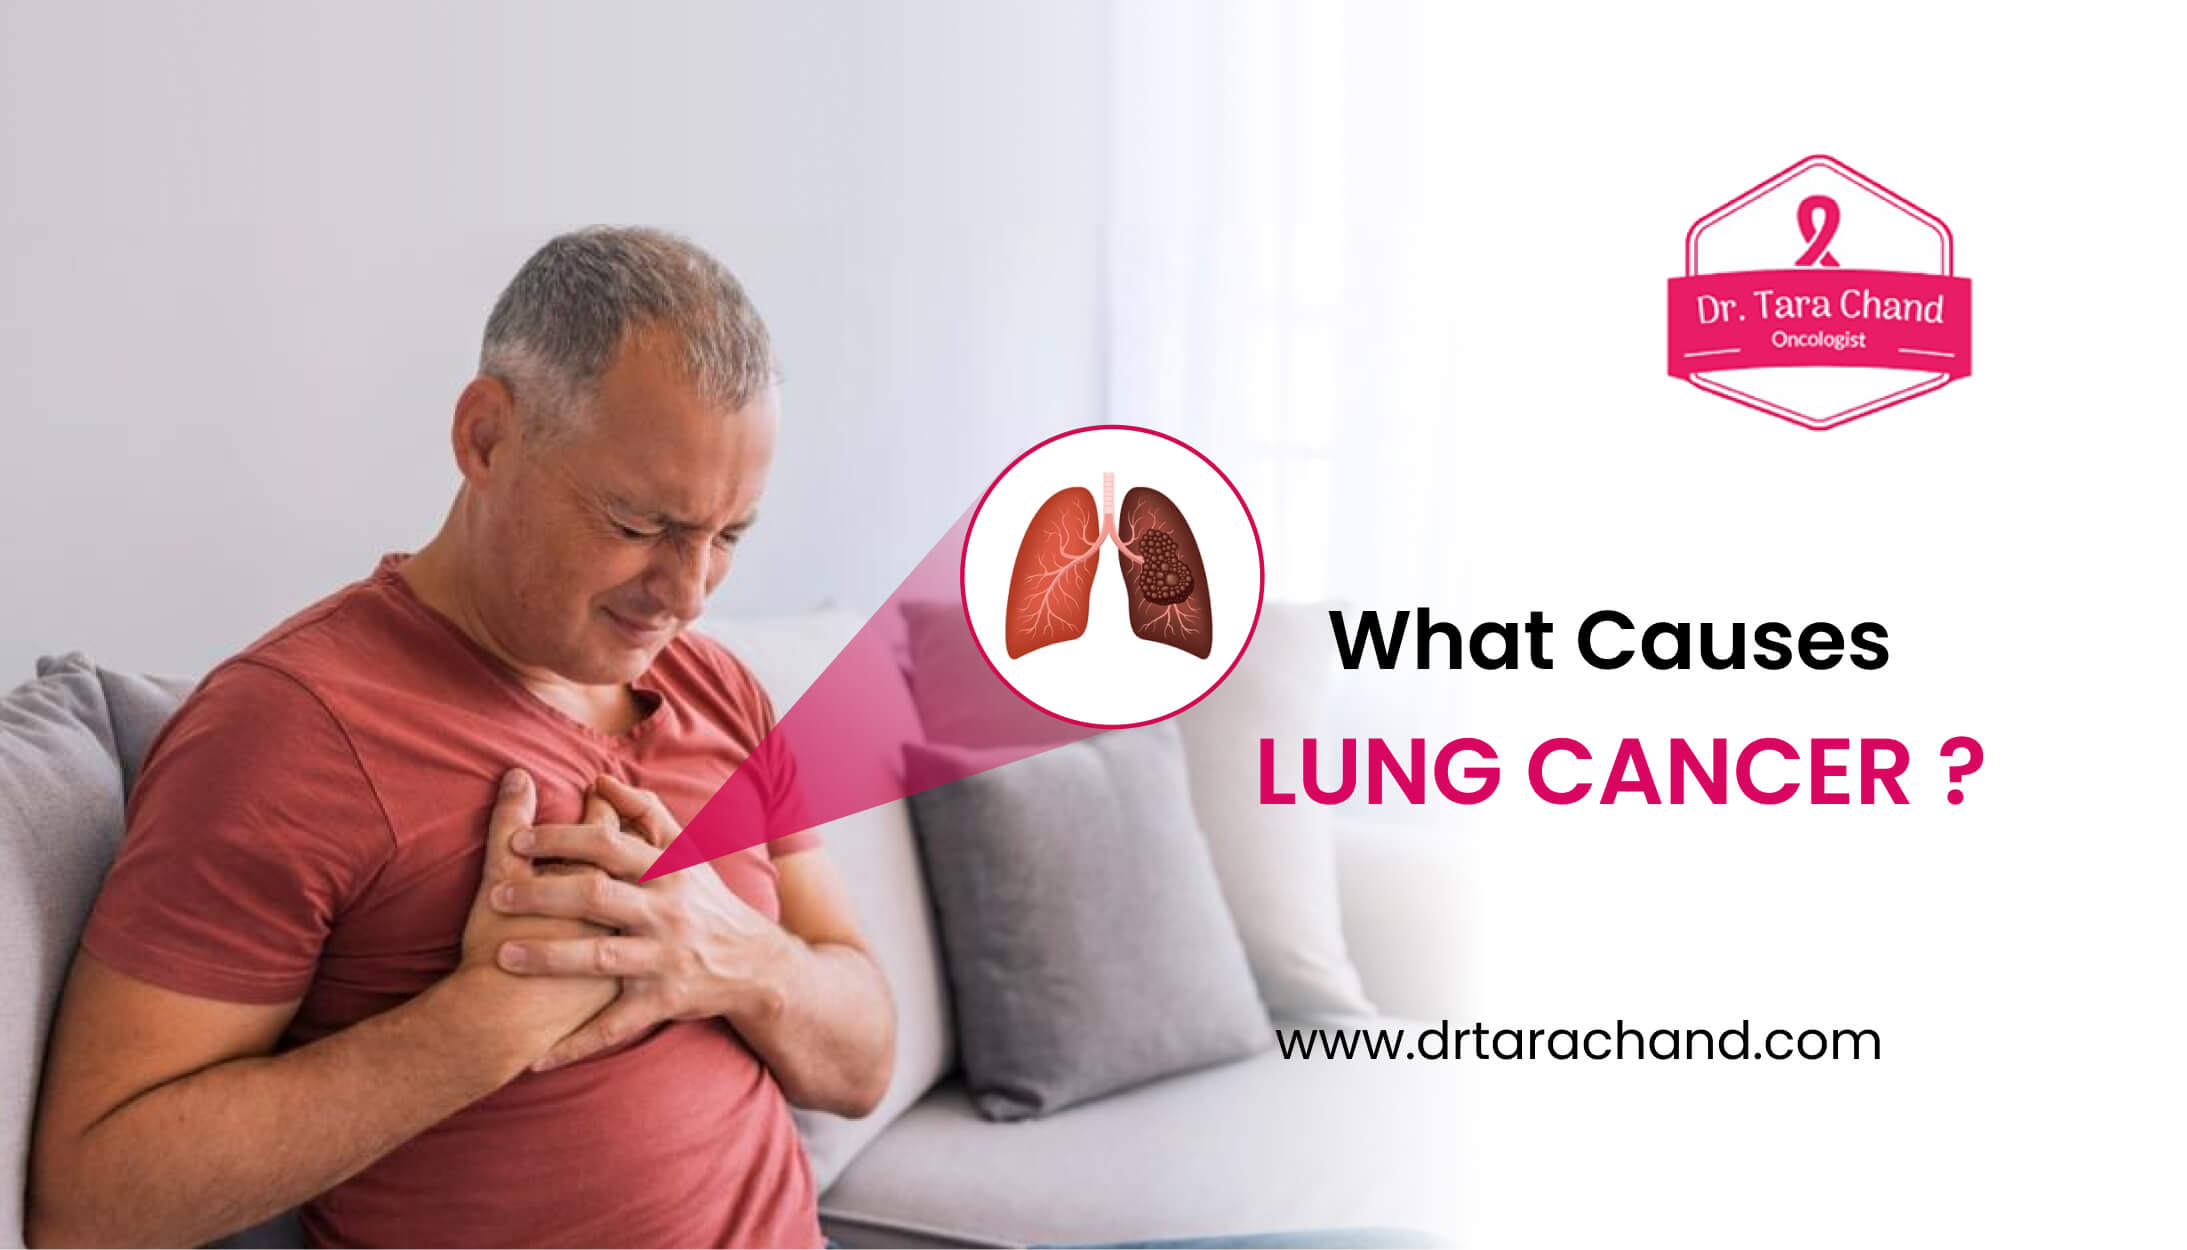 What causes lung cancer?